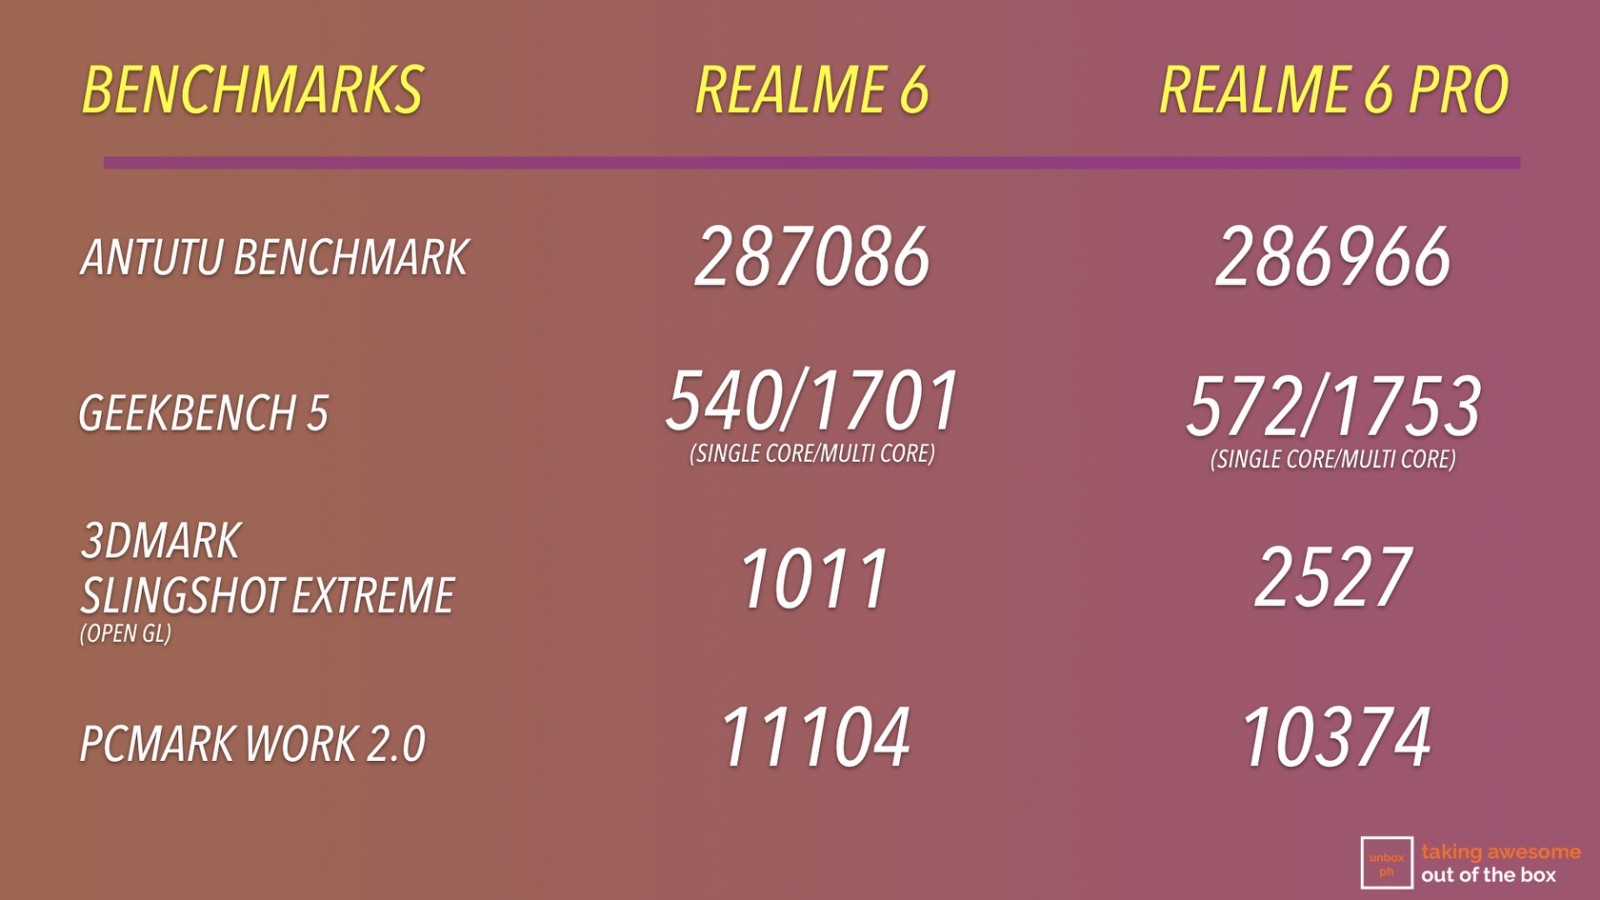 realme 6 and 6 pro benchmark test results